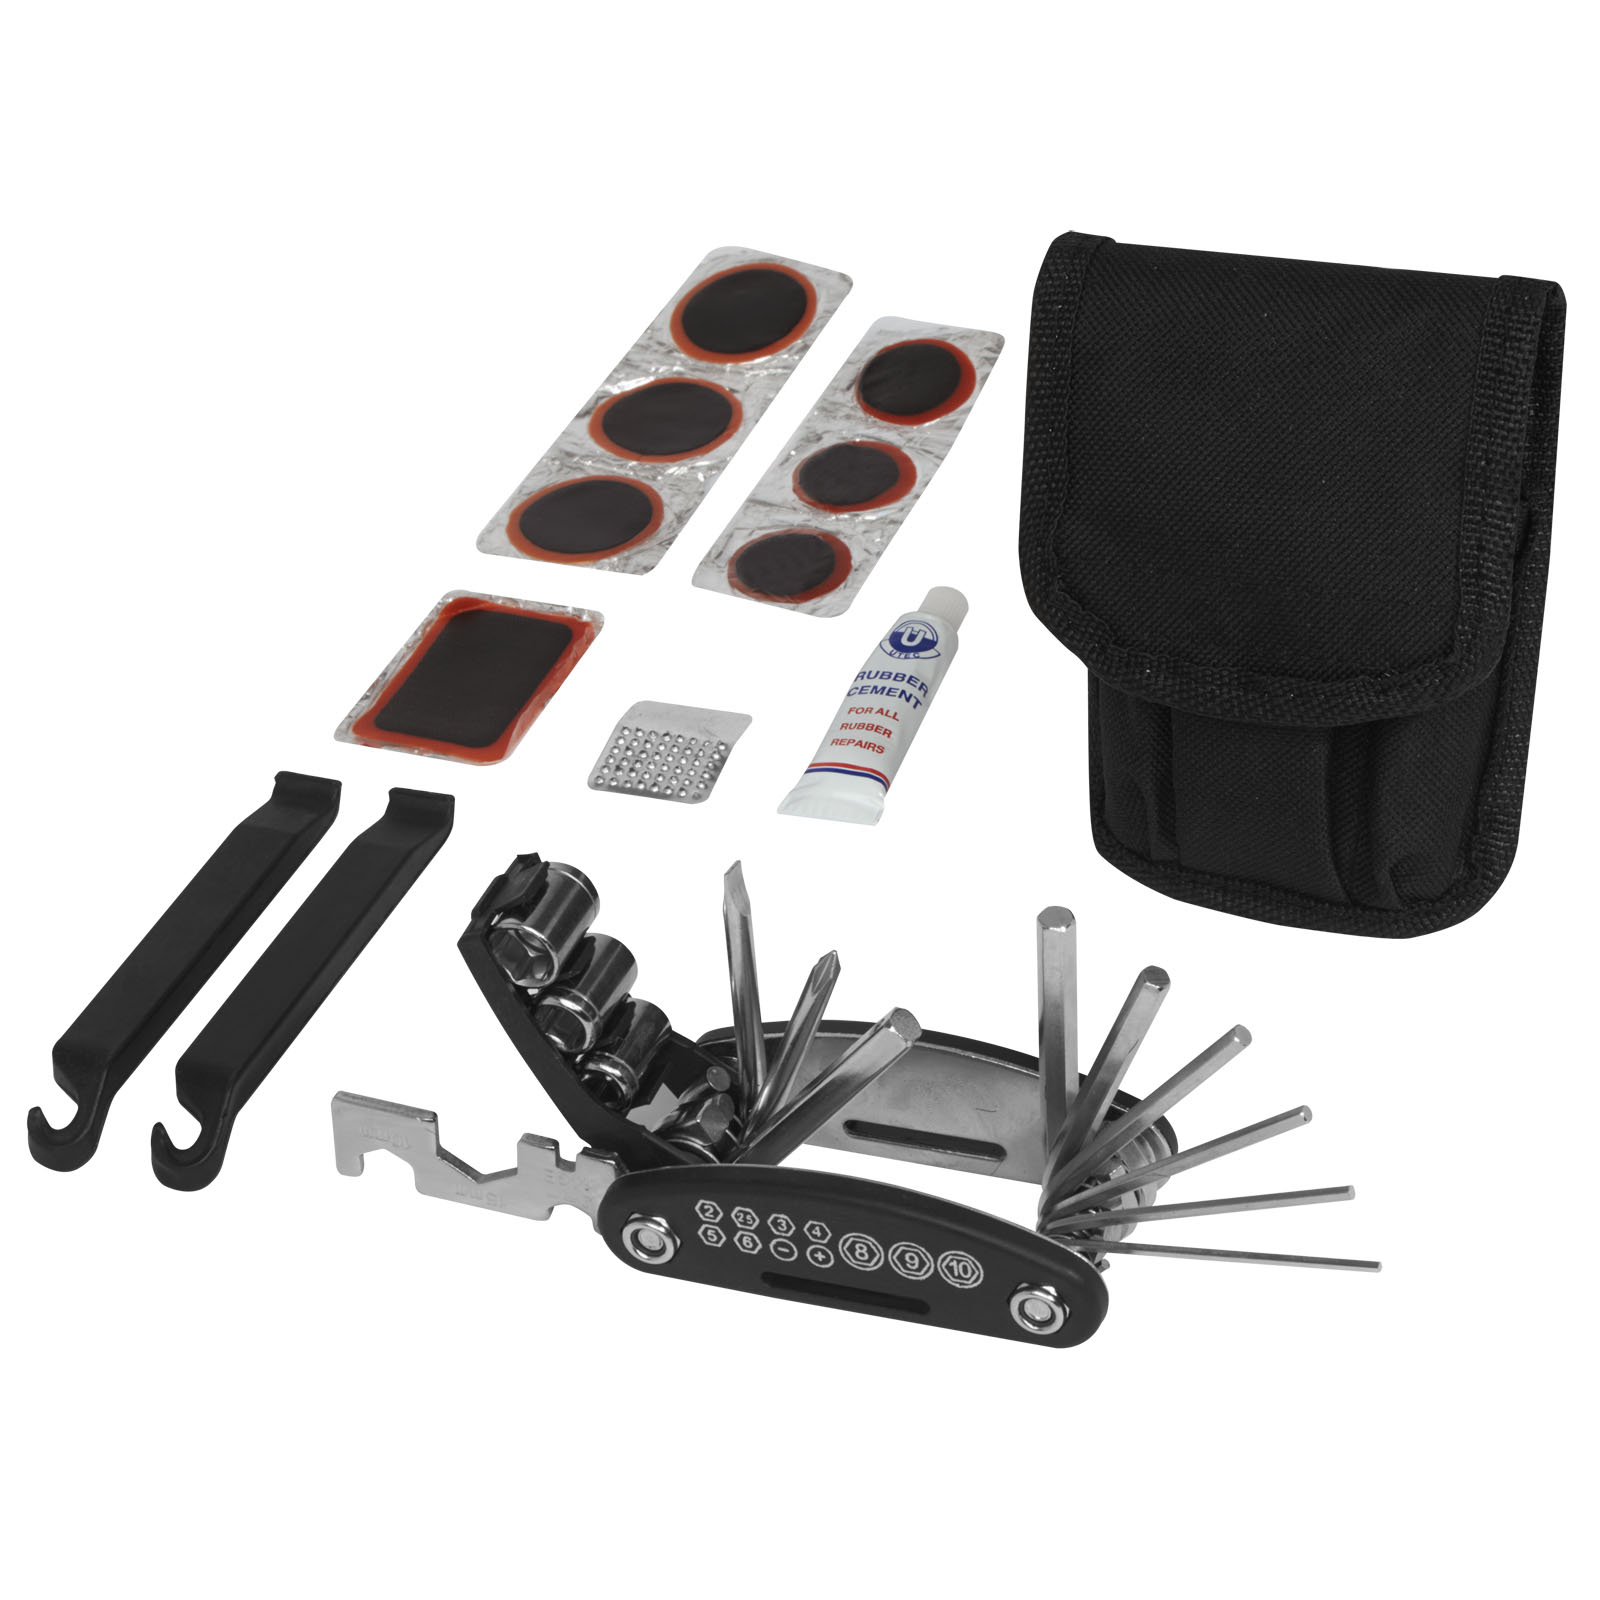 Cycling service kit MODO, 15 pcs in reflective case - solid black